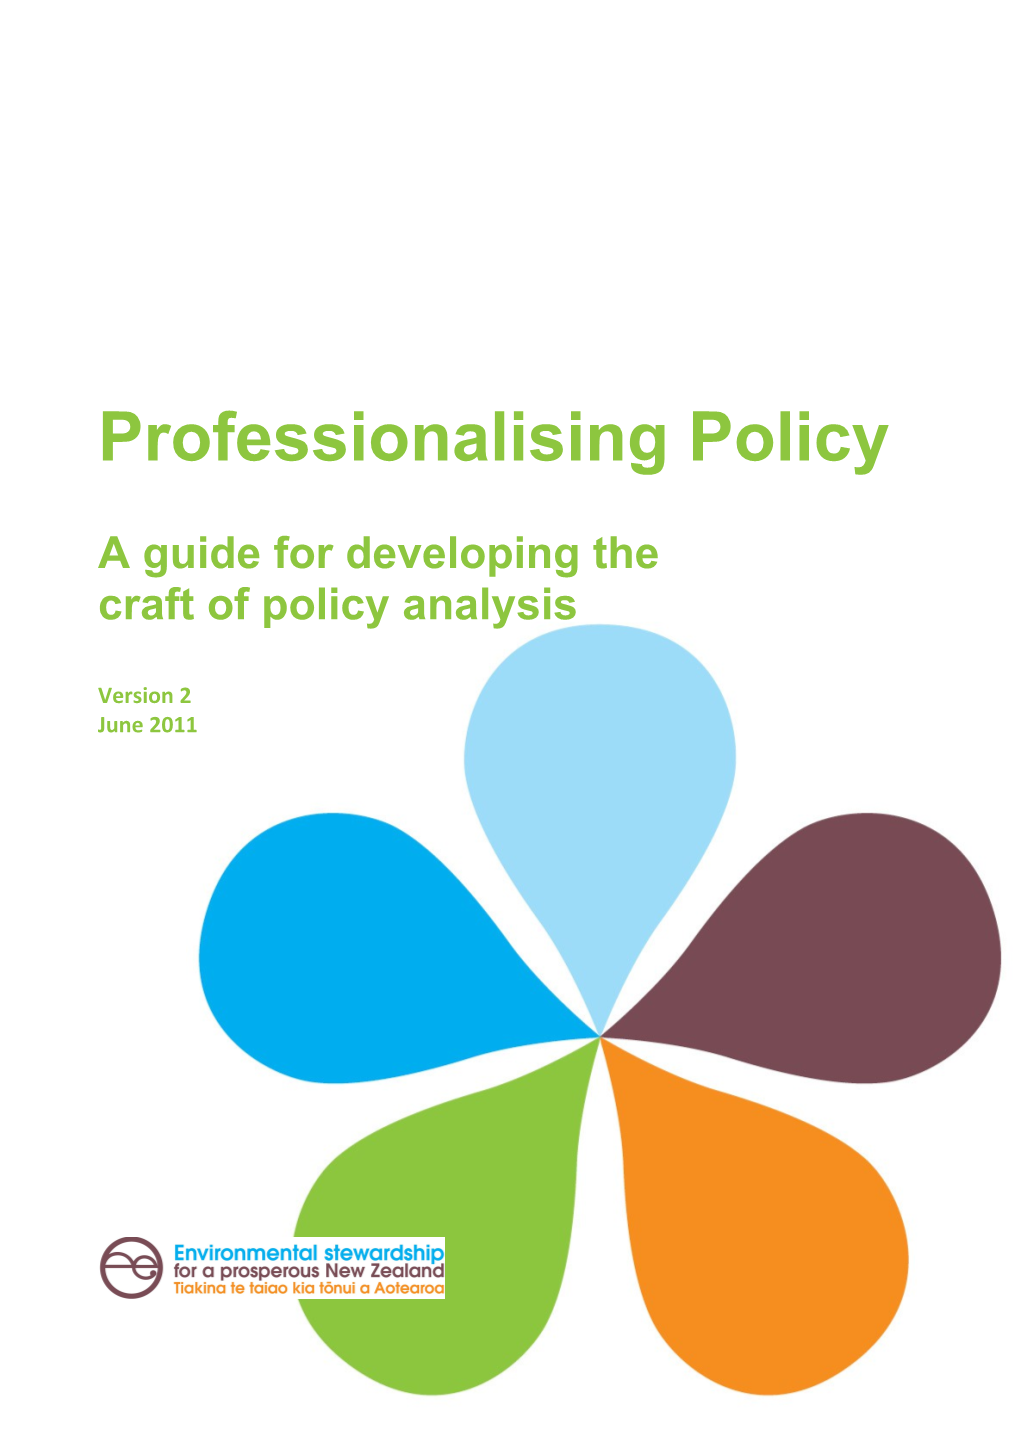 Professionalising-Policy-Guide-Version2-Final